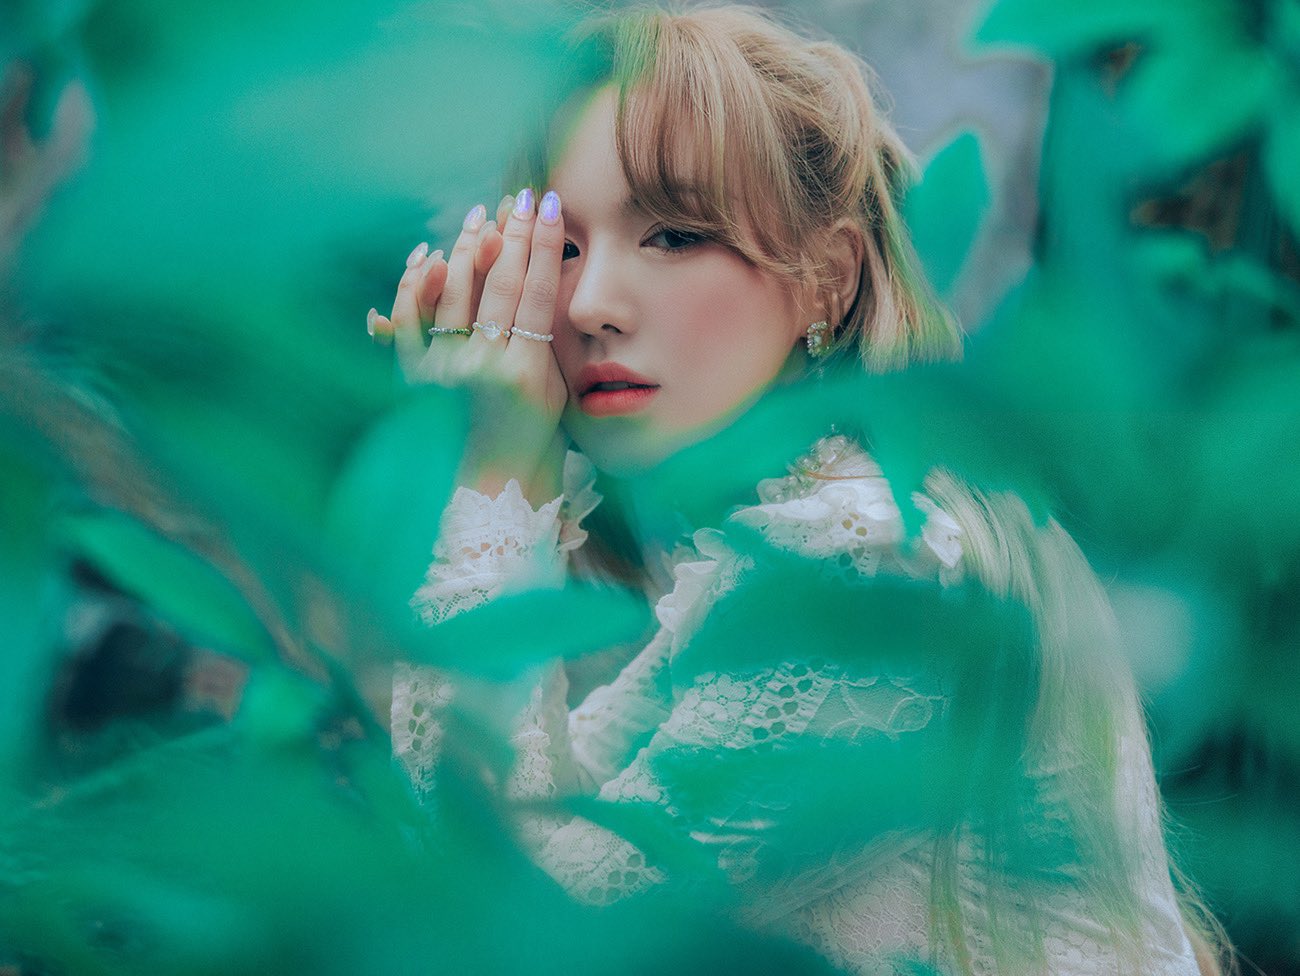 Red Velvet Wendy announces 'Voice Goddess' charm with first solo album 'Like Water'